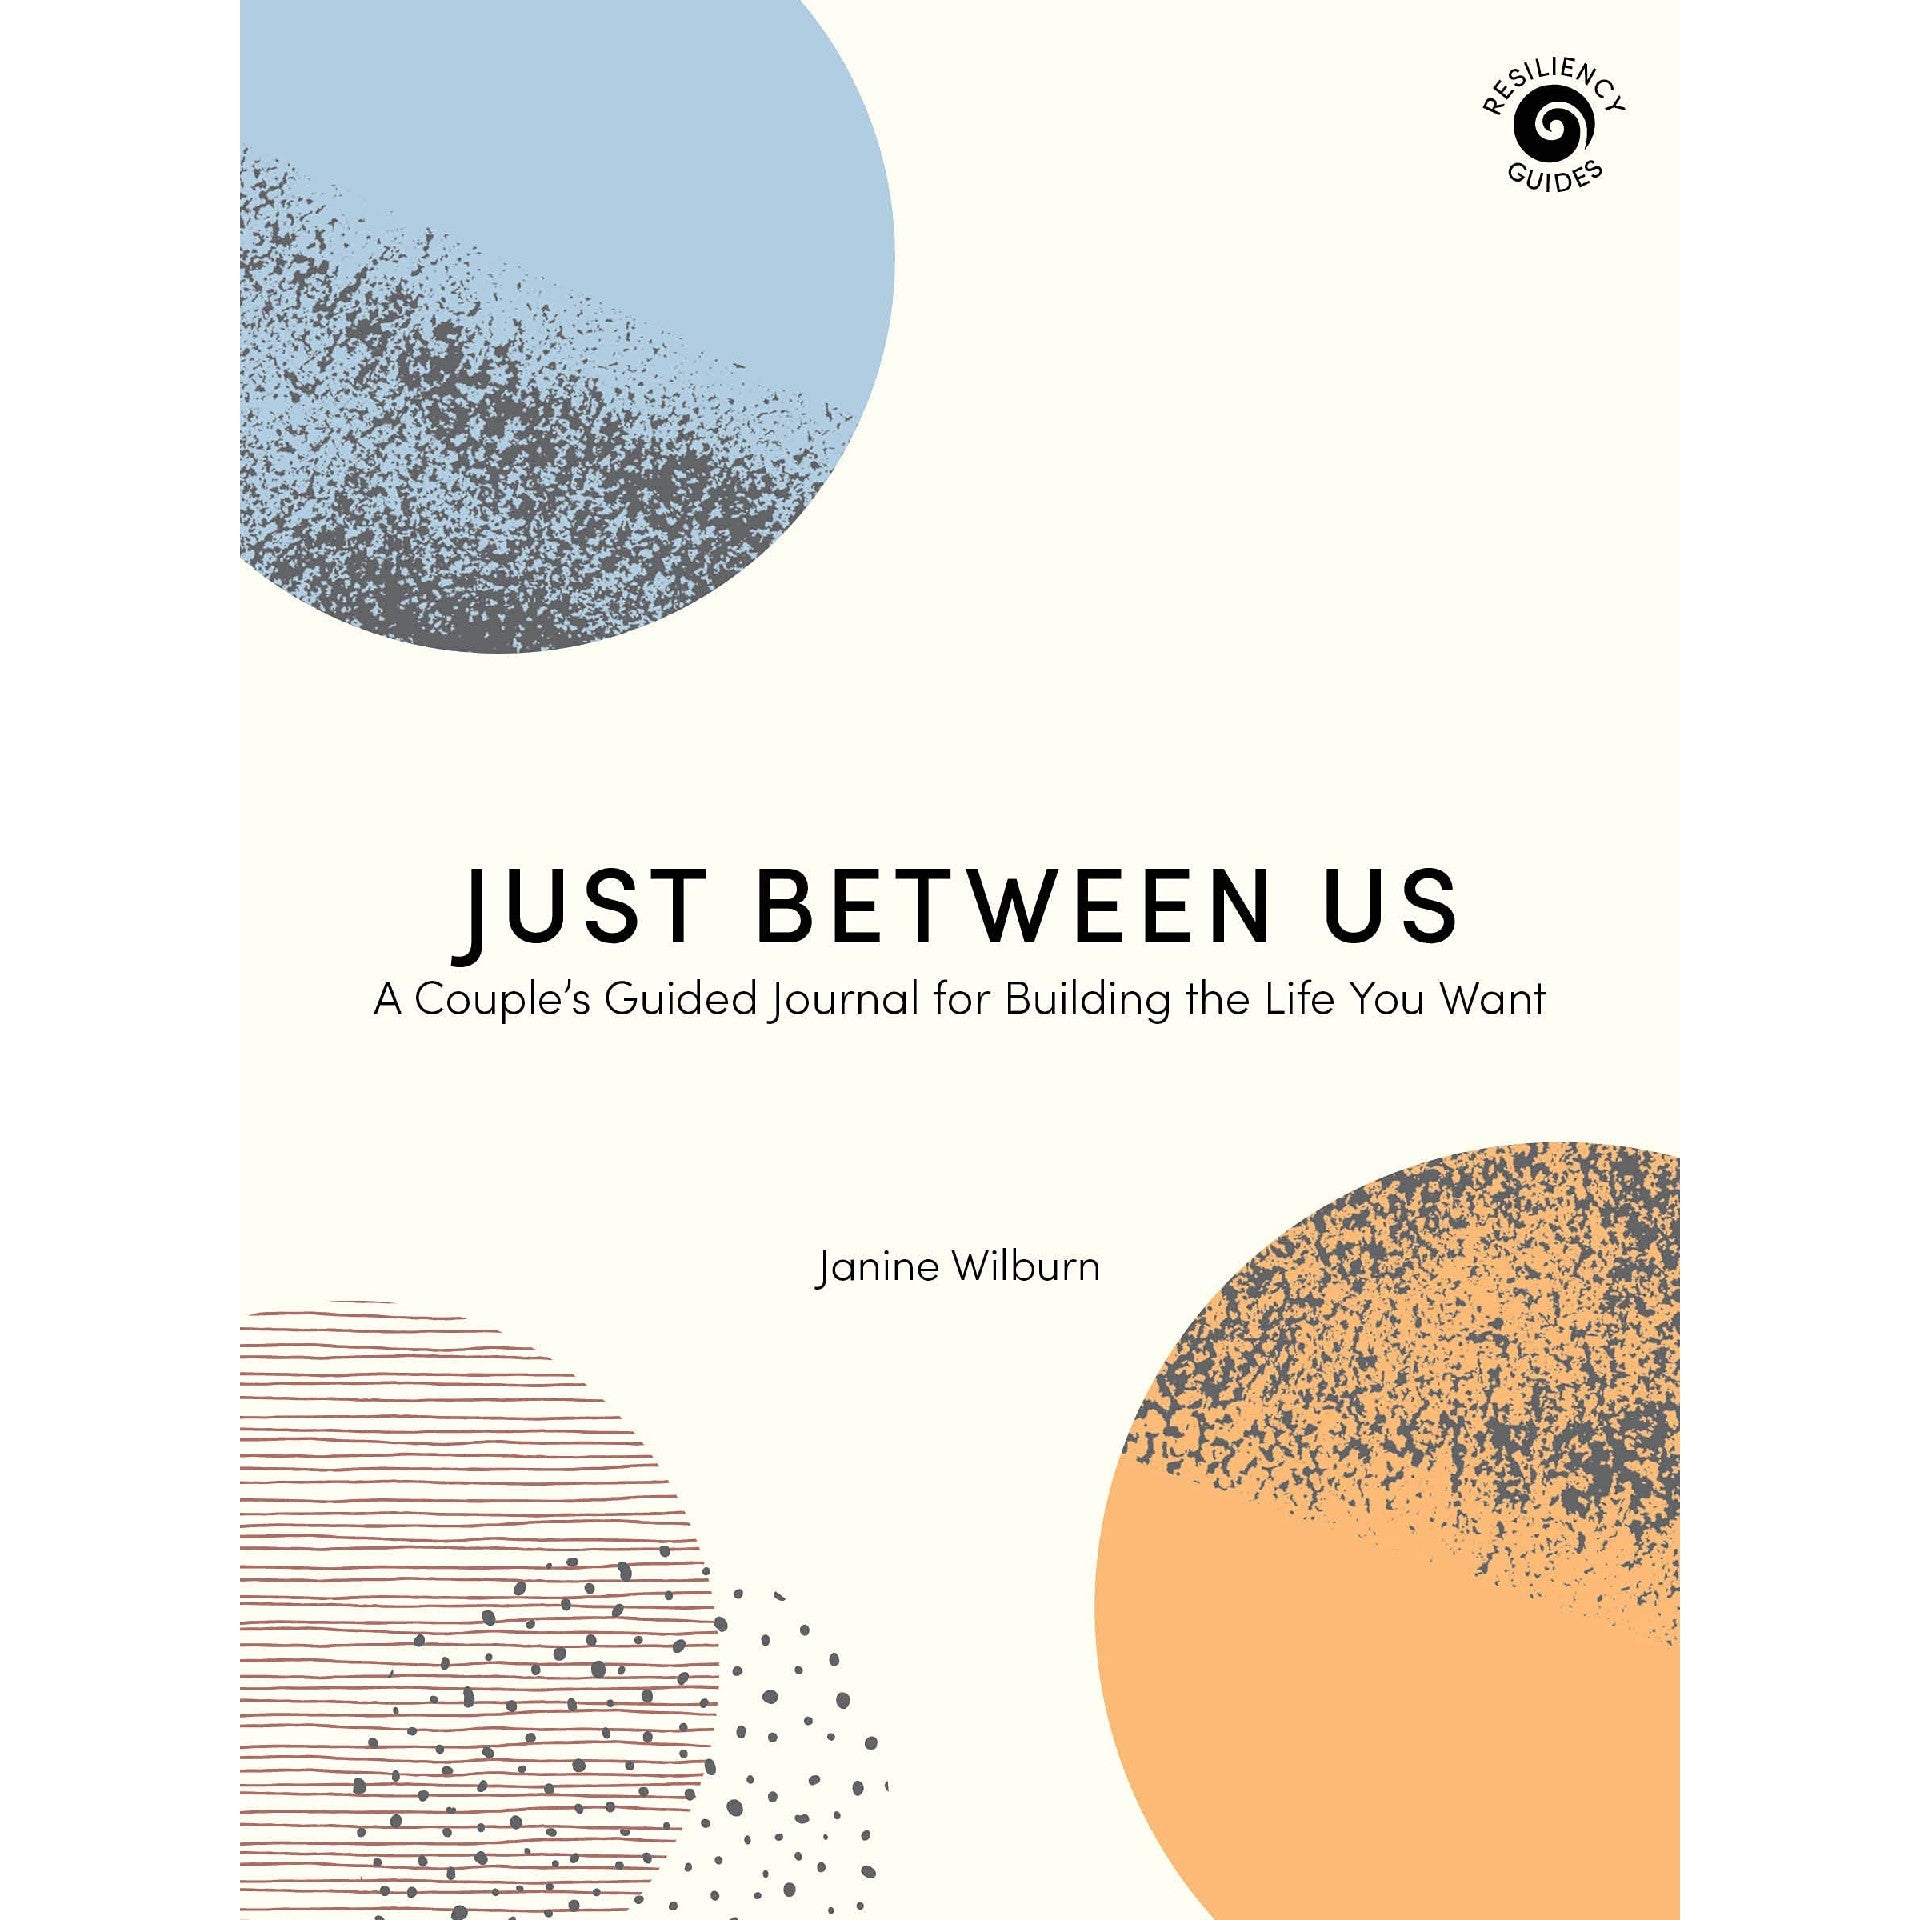 Just Between Us: A Couple's Guided Journal for Building the Life You Want